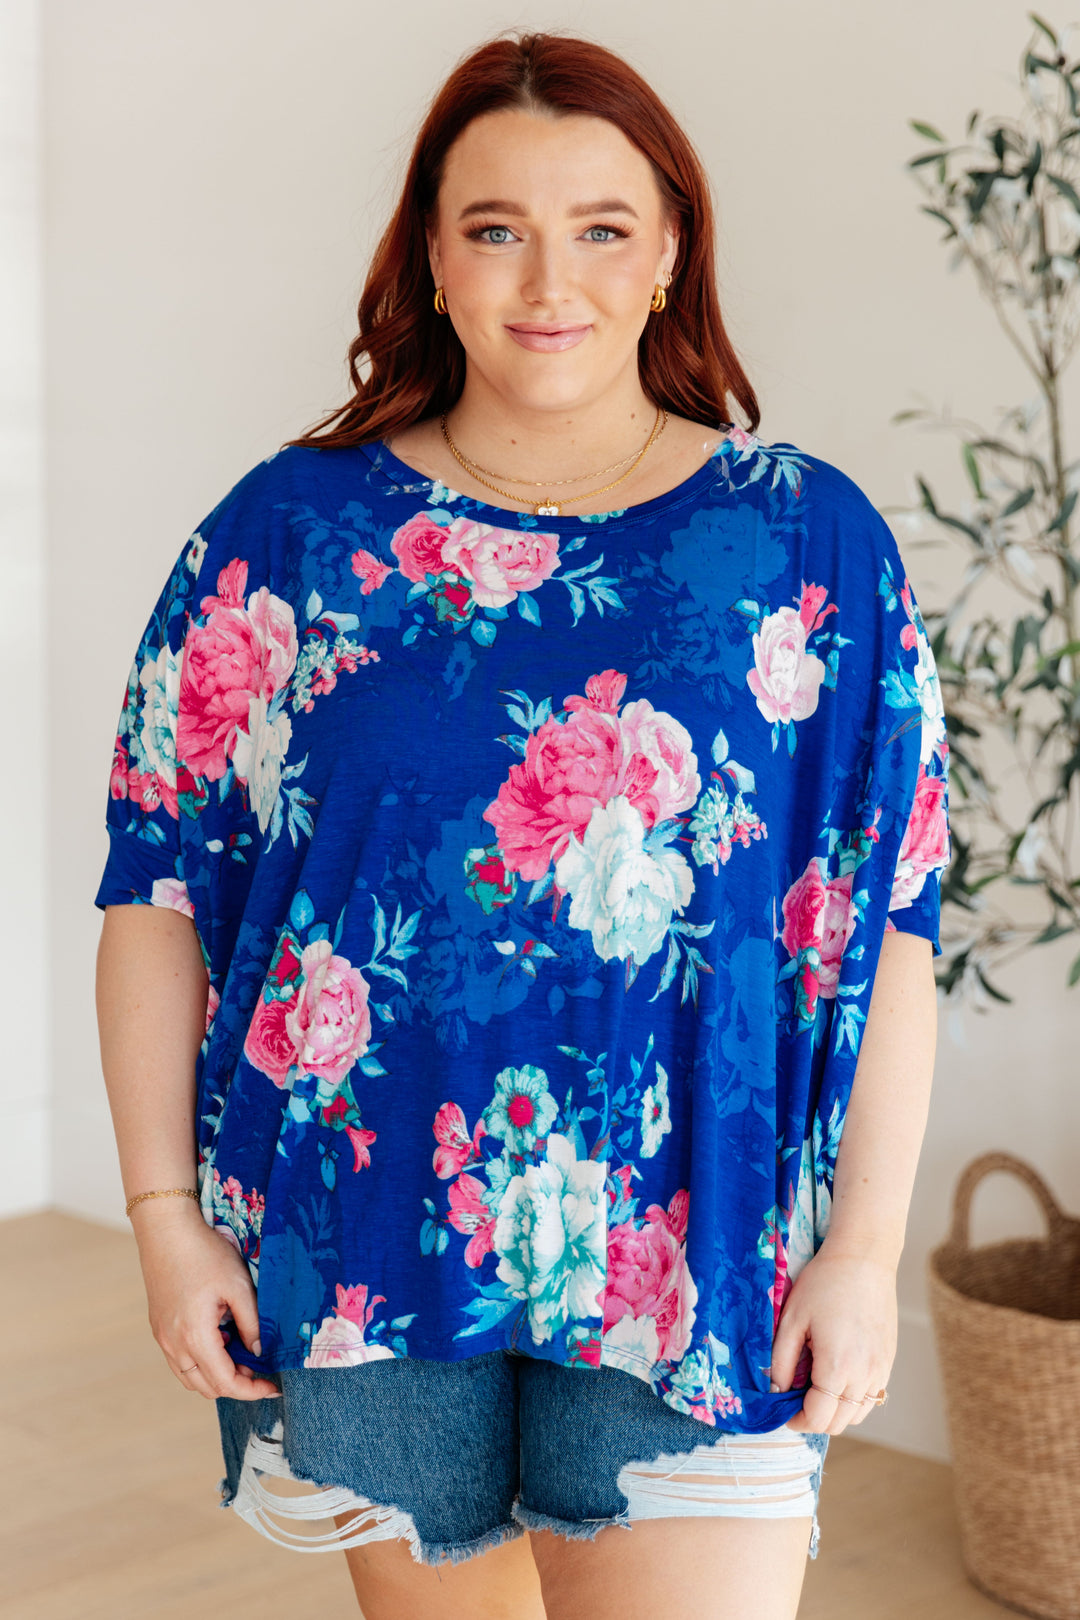 Essential Blouse in Royal and Pink Floral-Short Sleeve Tops-Inspired by Justeen-Women's Clothing Boutique in Chicago, Illinois